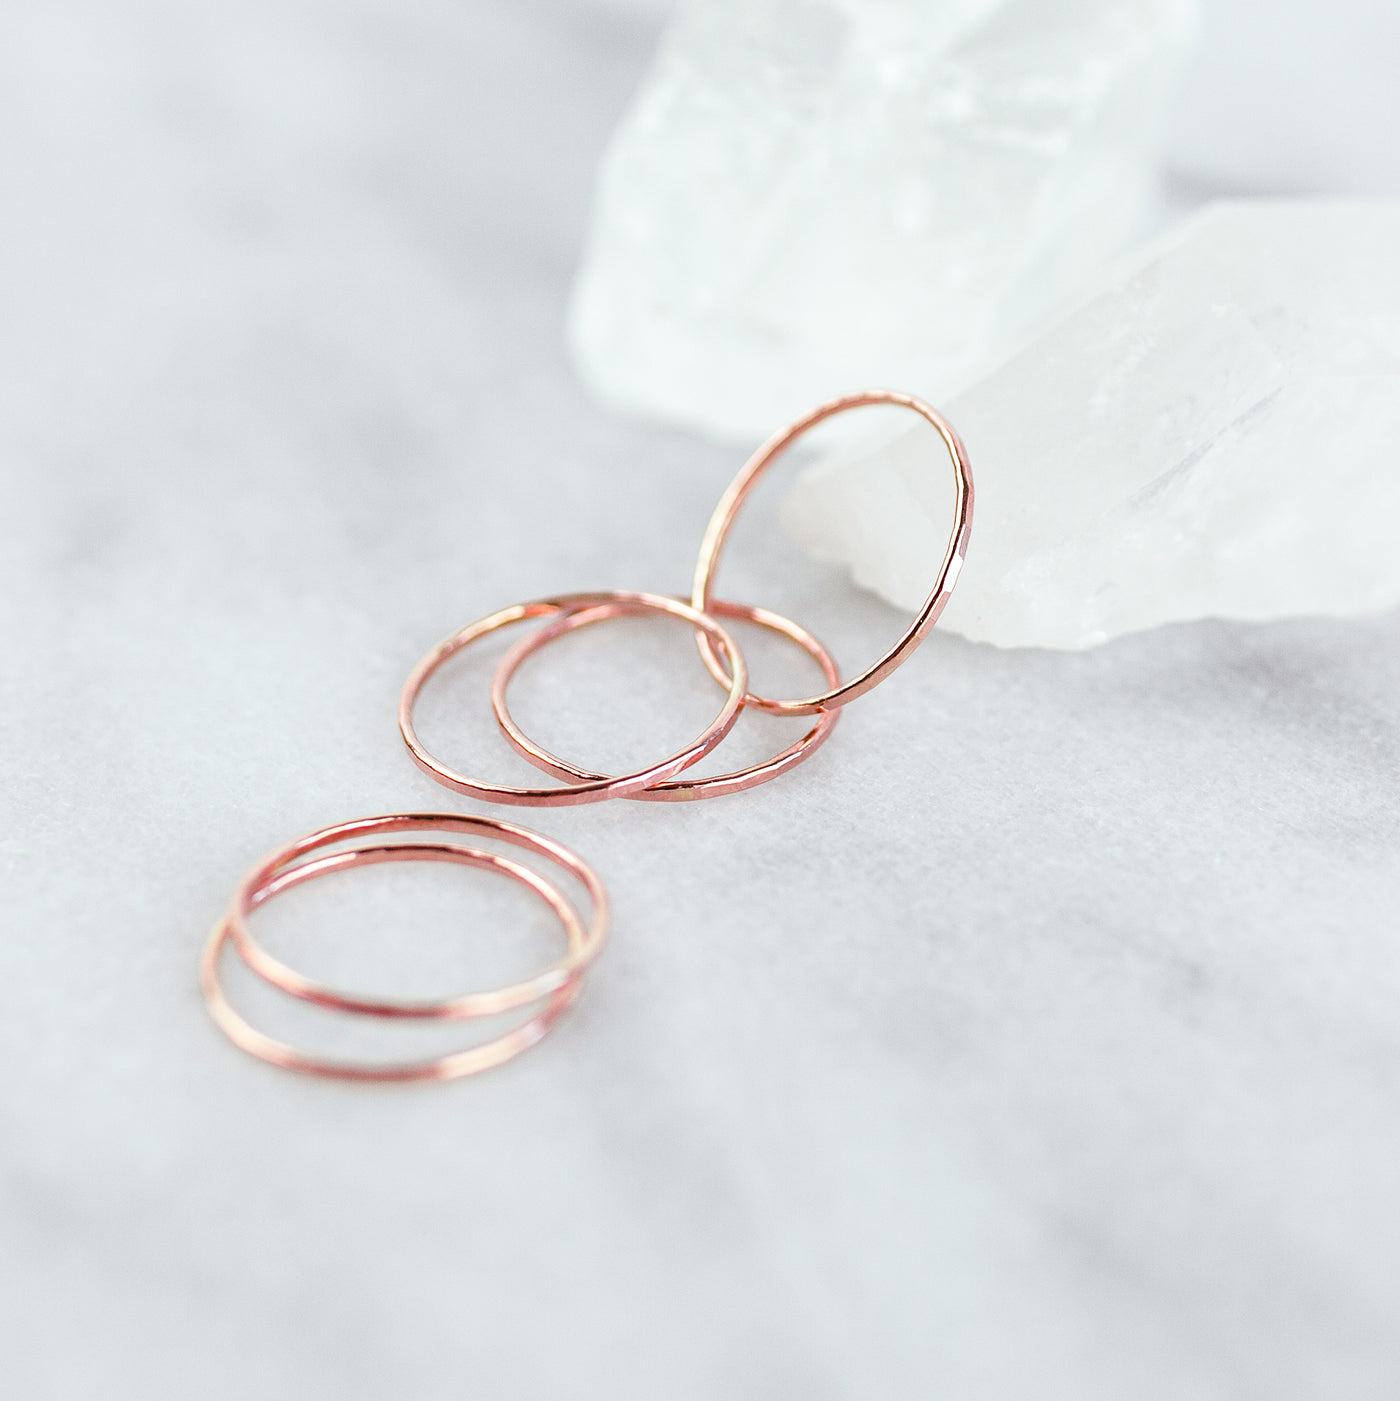 Faceted Stacking Ring - 14k Rose Gold Fill